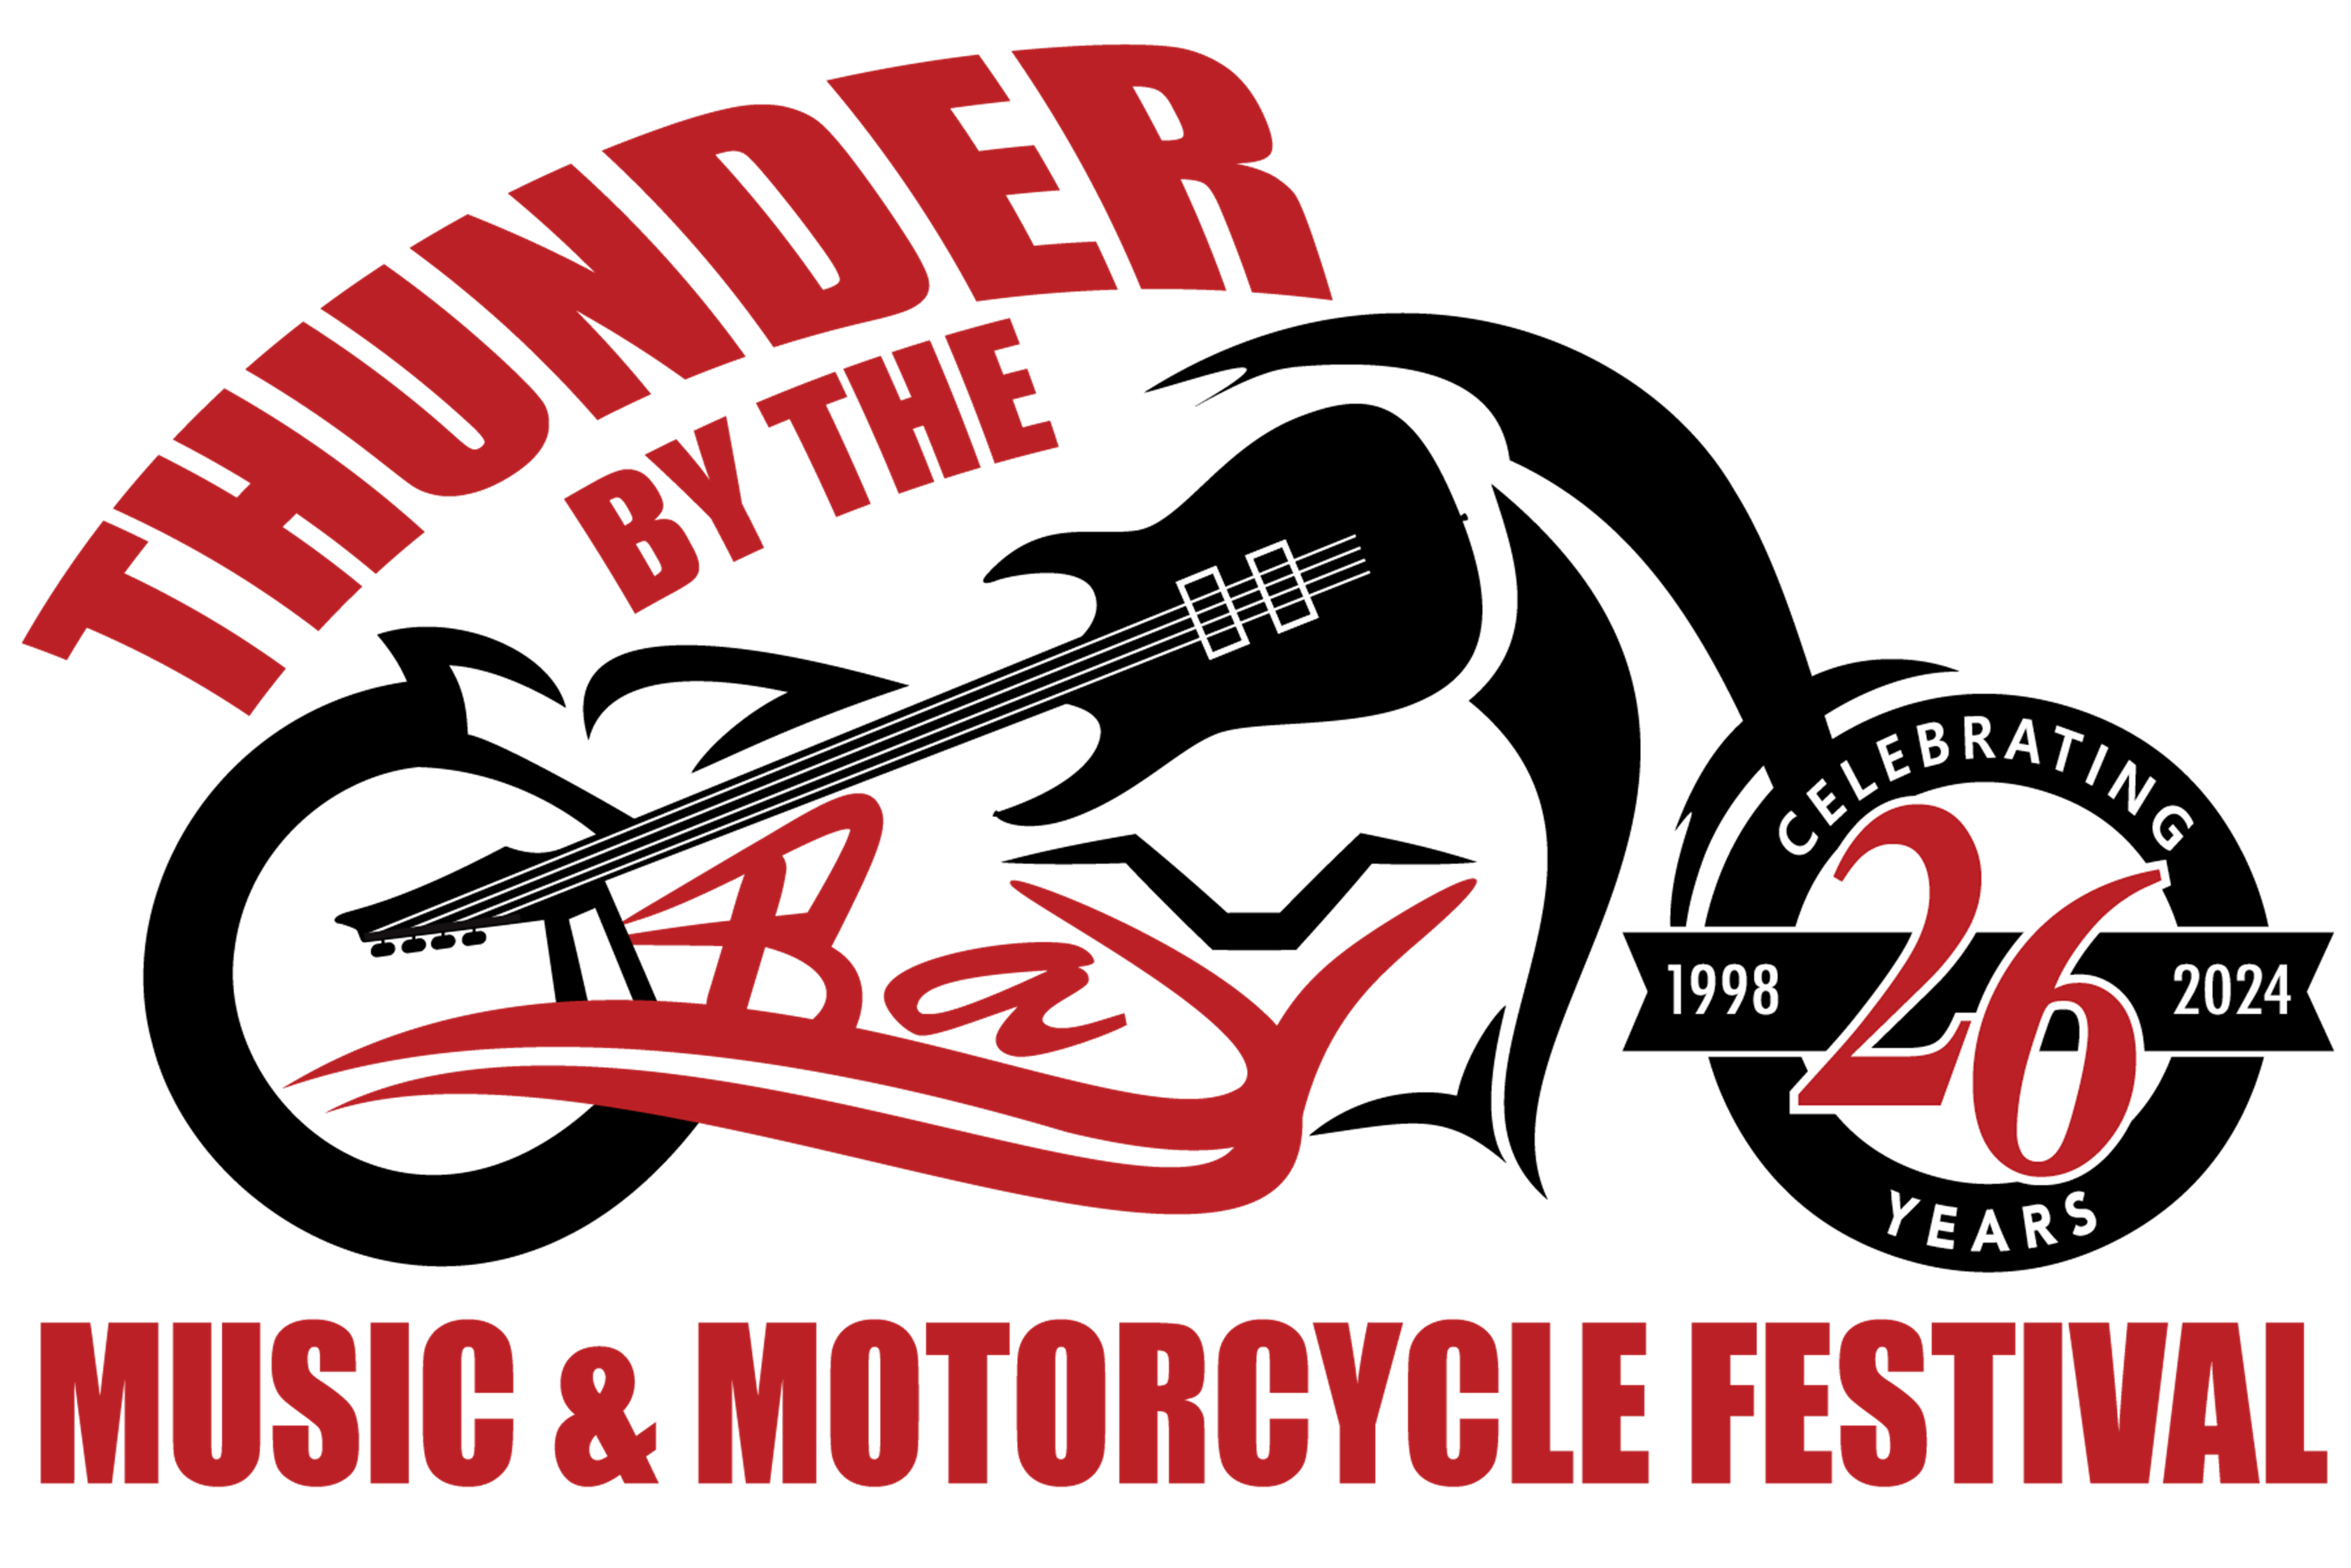 26th Annual Thunder By The Bay Music & Motorcycle Festival